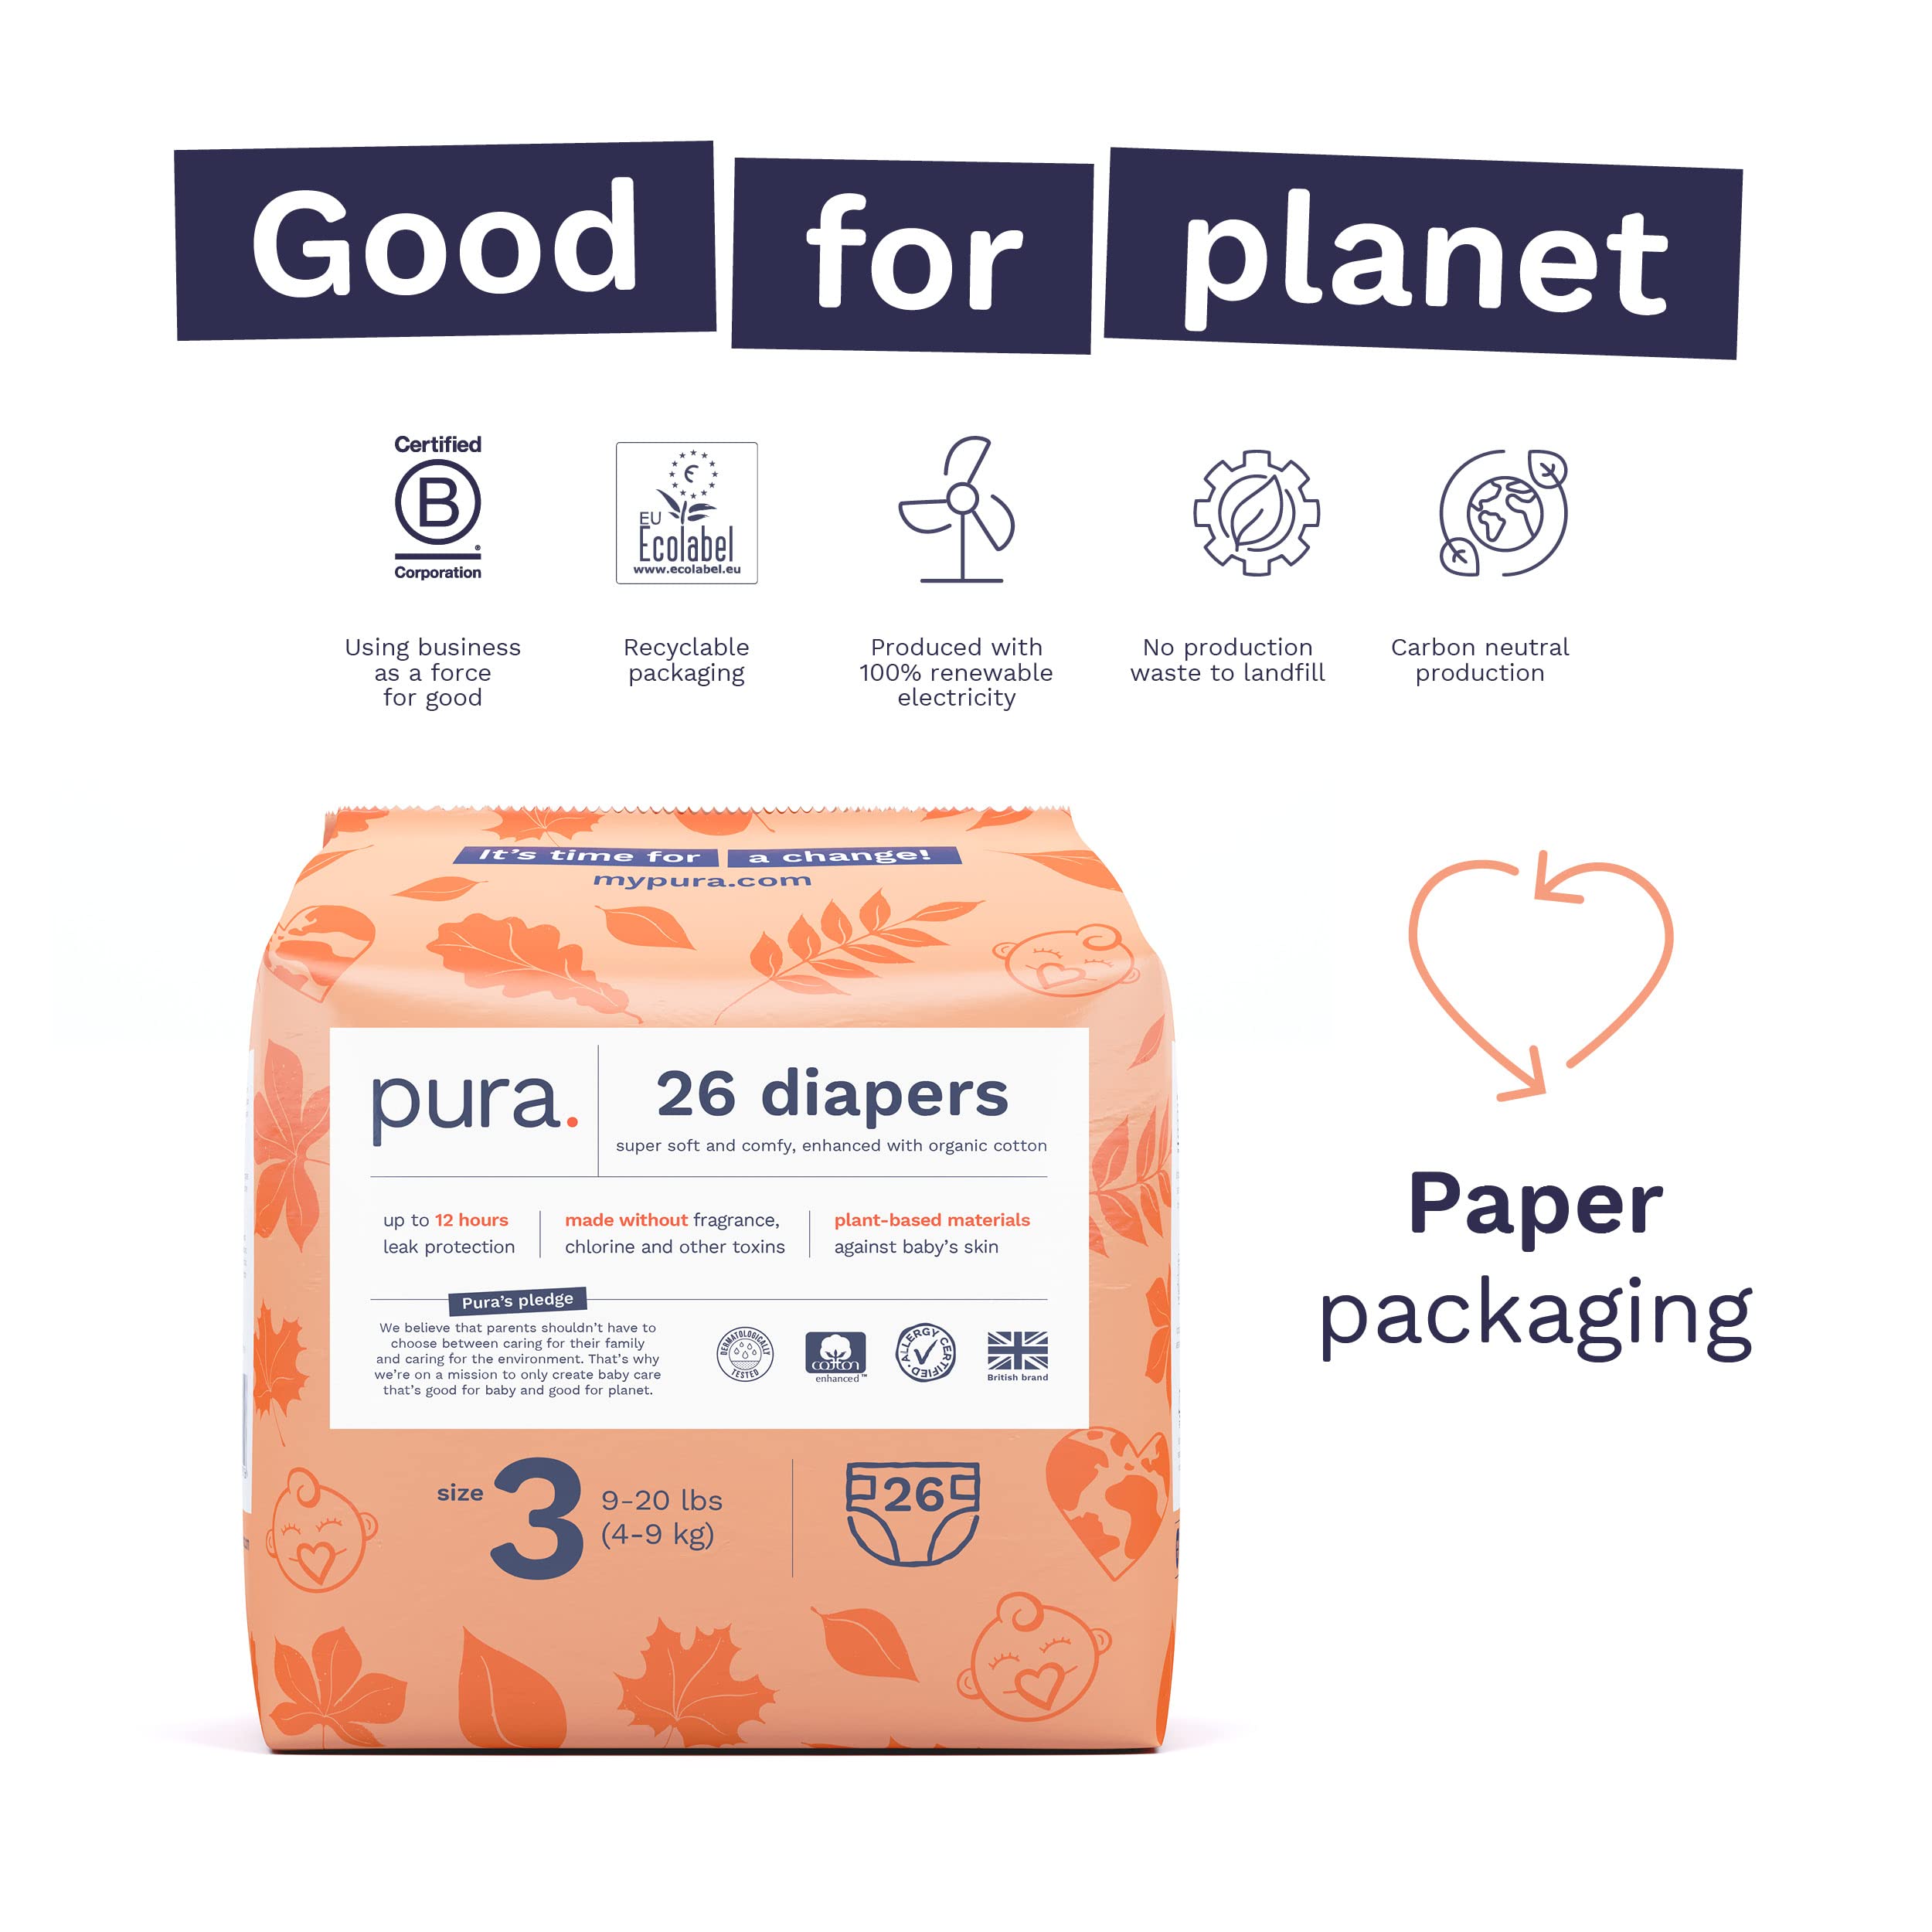 Pura Size 3 Eco-Friendly Diapers (9-20lbs) Hypoallergenic, Soft Organic Cotton Comfort, Sustainable, up to 12 Hours Leak Protection, Allergy UK, Recyclable Paper Packaging. 1 Pack of 26 Diapers